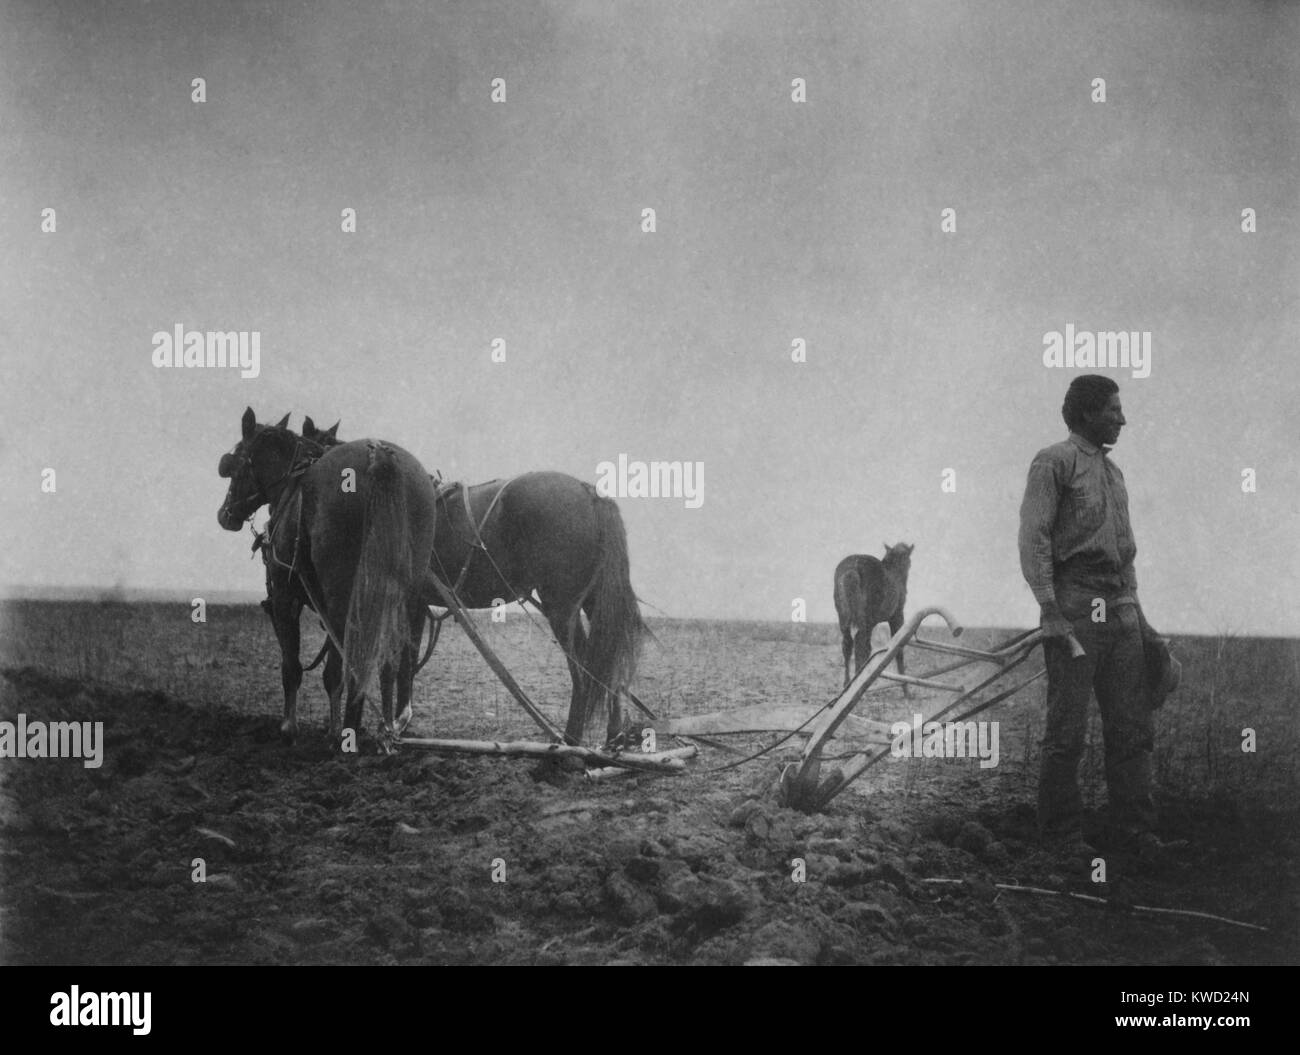 THE DAWN OF CIVILIZATION, a photo of a Native American in a field with a horse-drawn plow. C. 1899-1900. He was student at the African American college Hampton Normal and Agricultural Institute, which admitted its first Indian students in 1878. 19th century Progressives equated civilization with independent farming. Much education and government policy aimed to the convert for formerly nomadic hunters to yeoman farmers. Photo by Frances Benjamin Johnston  (BSLOC 2017 20 141) Stock Photo